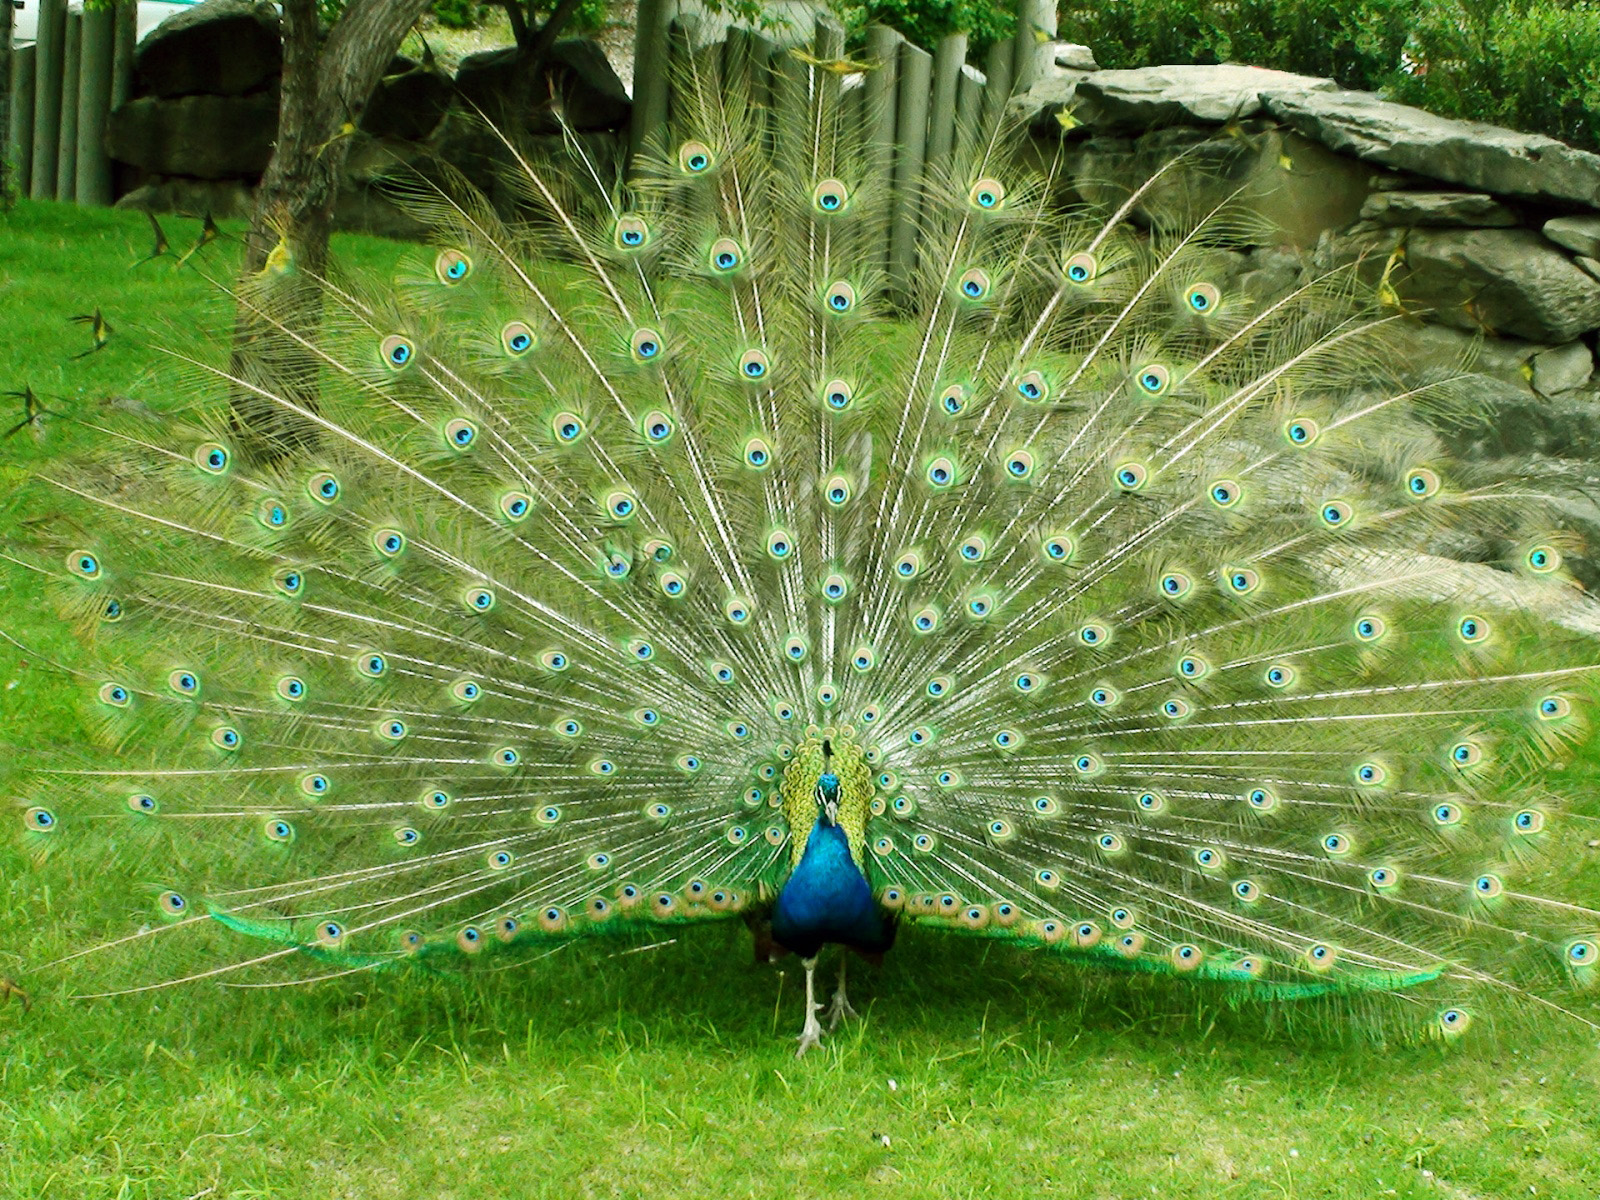 Android Images Of Peacock By Kaycee Lavis - Peacock Wallpaper Desktop , HD Wallpaper & Backgrounds